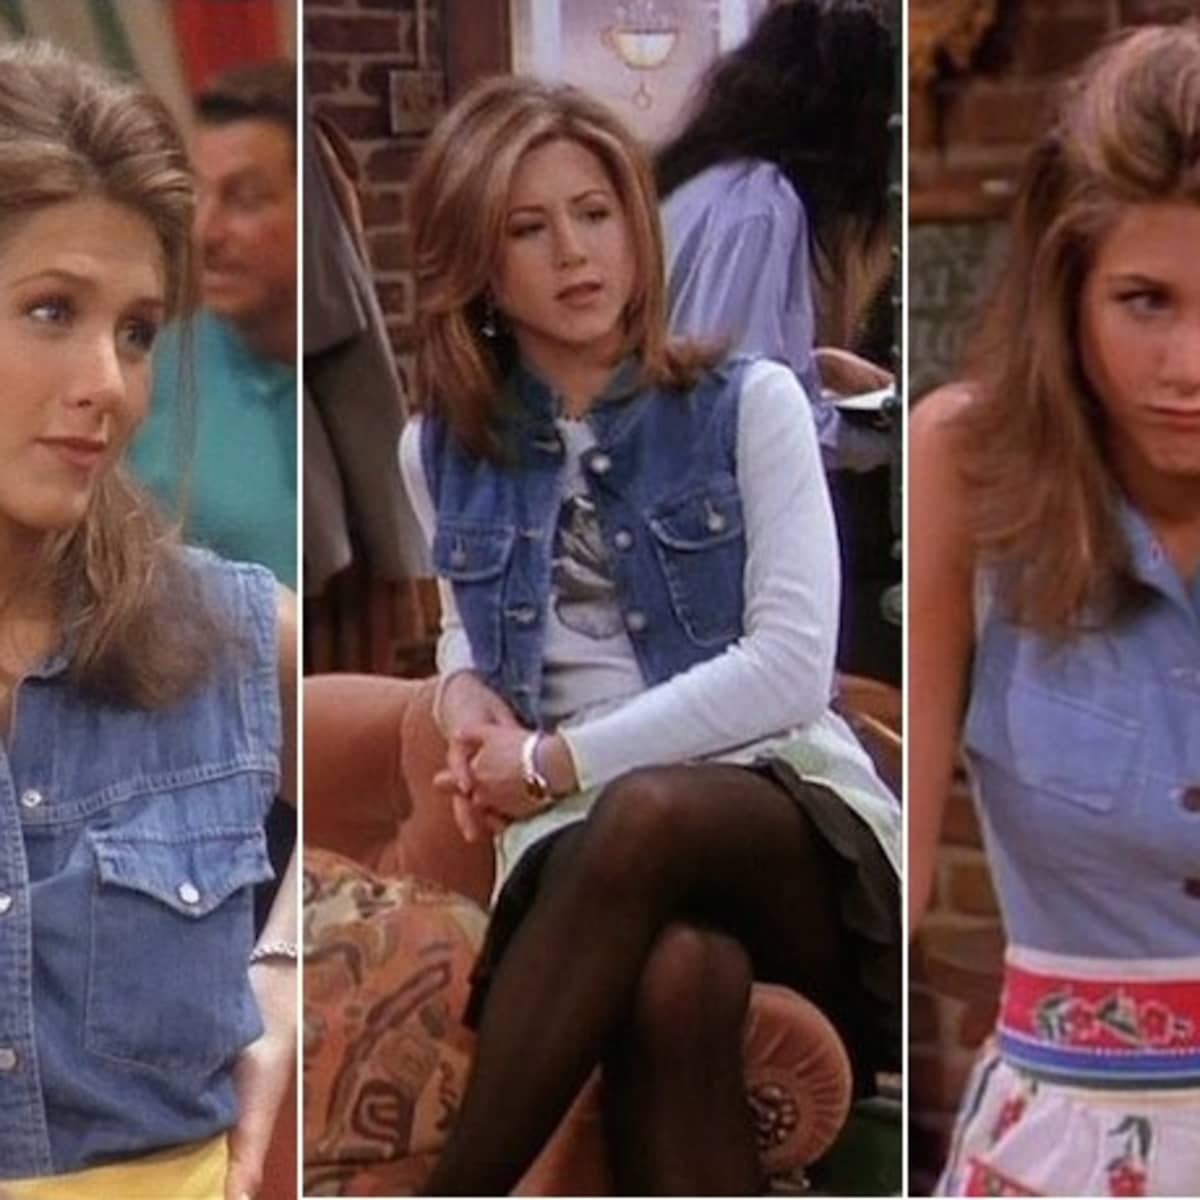 How To Get Rachel Green's Minimal Chic Style And Outfits In 2023